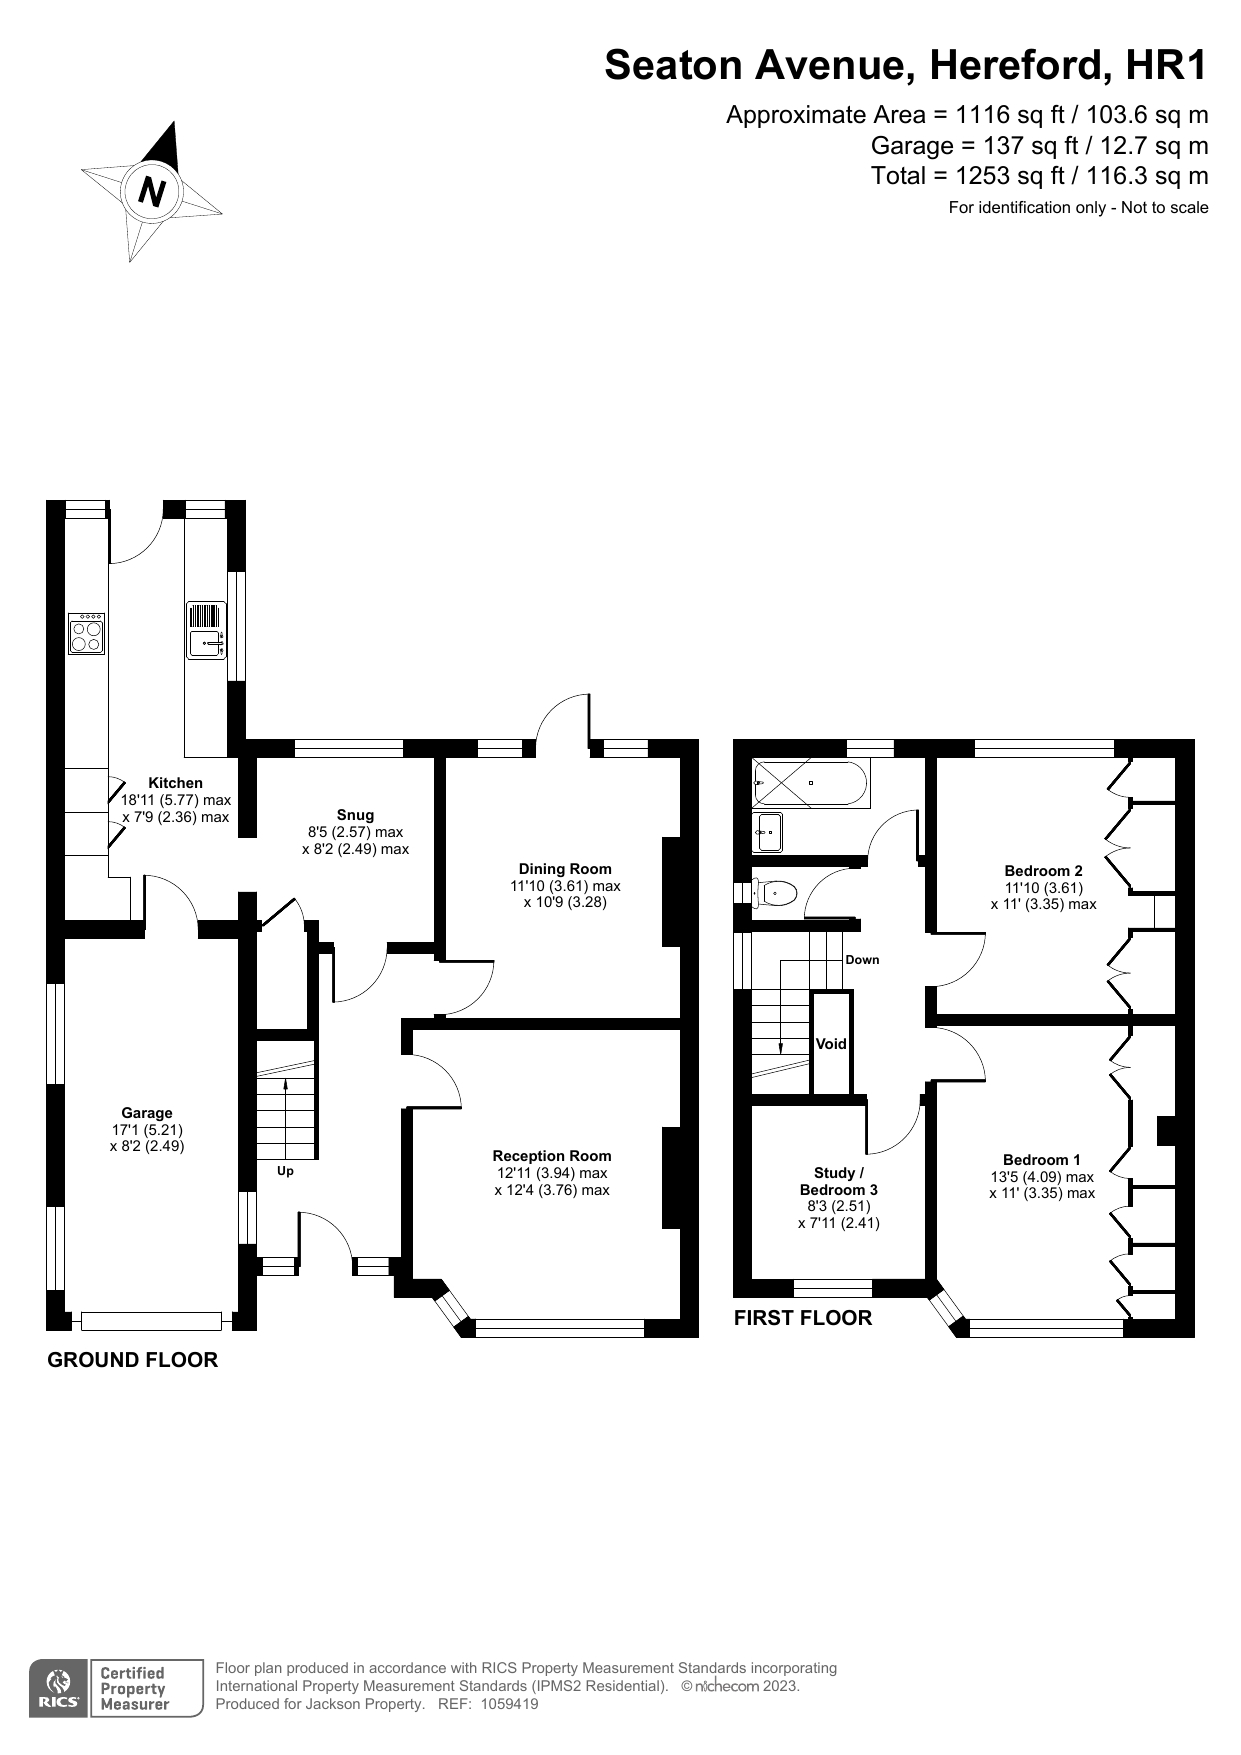 3 bed semi-detached house for sale in Seaton Avenue, Hereford - Property floorplan